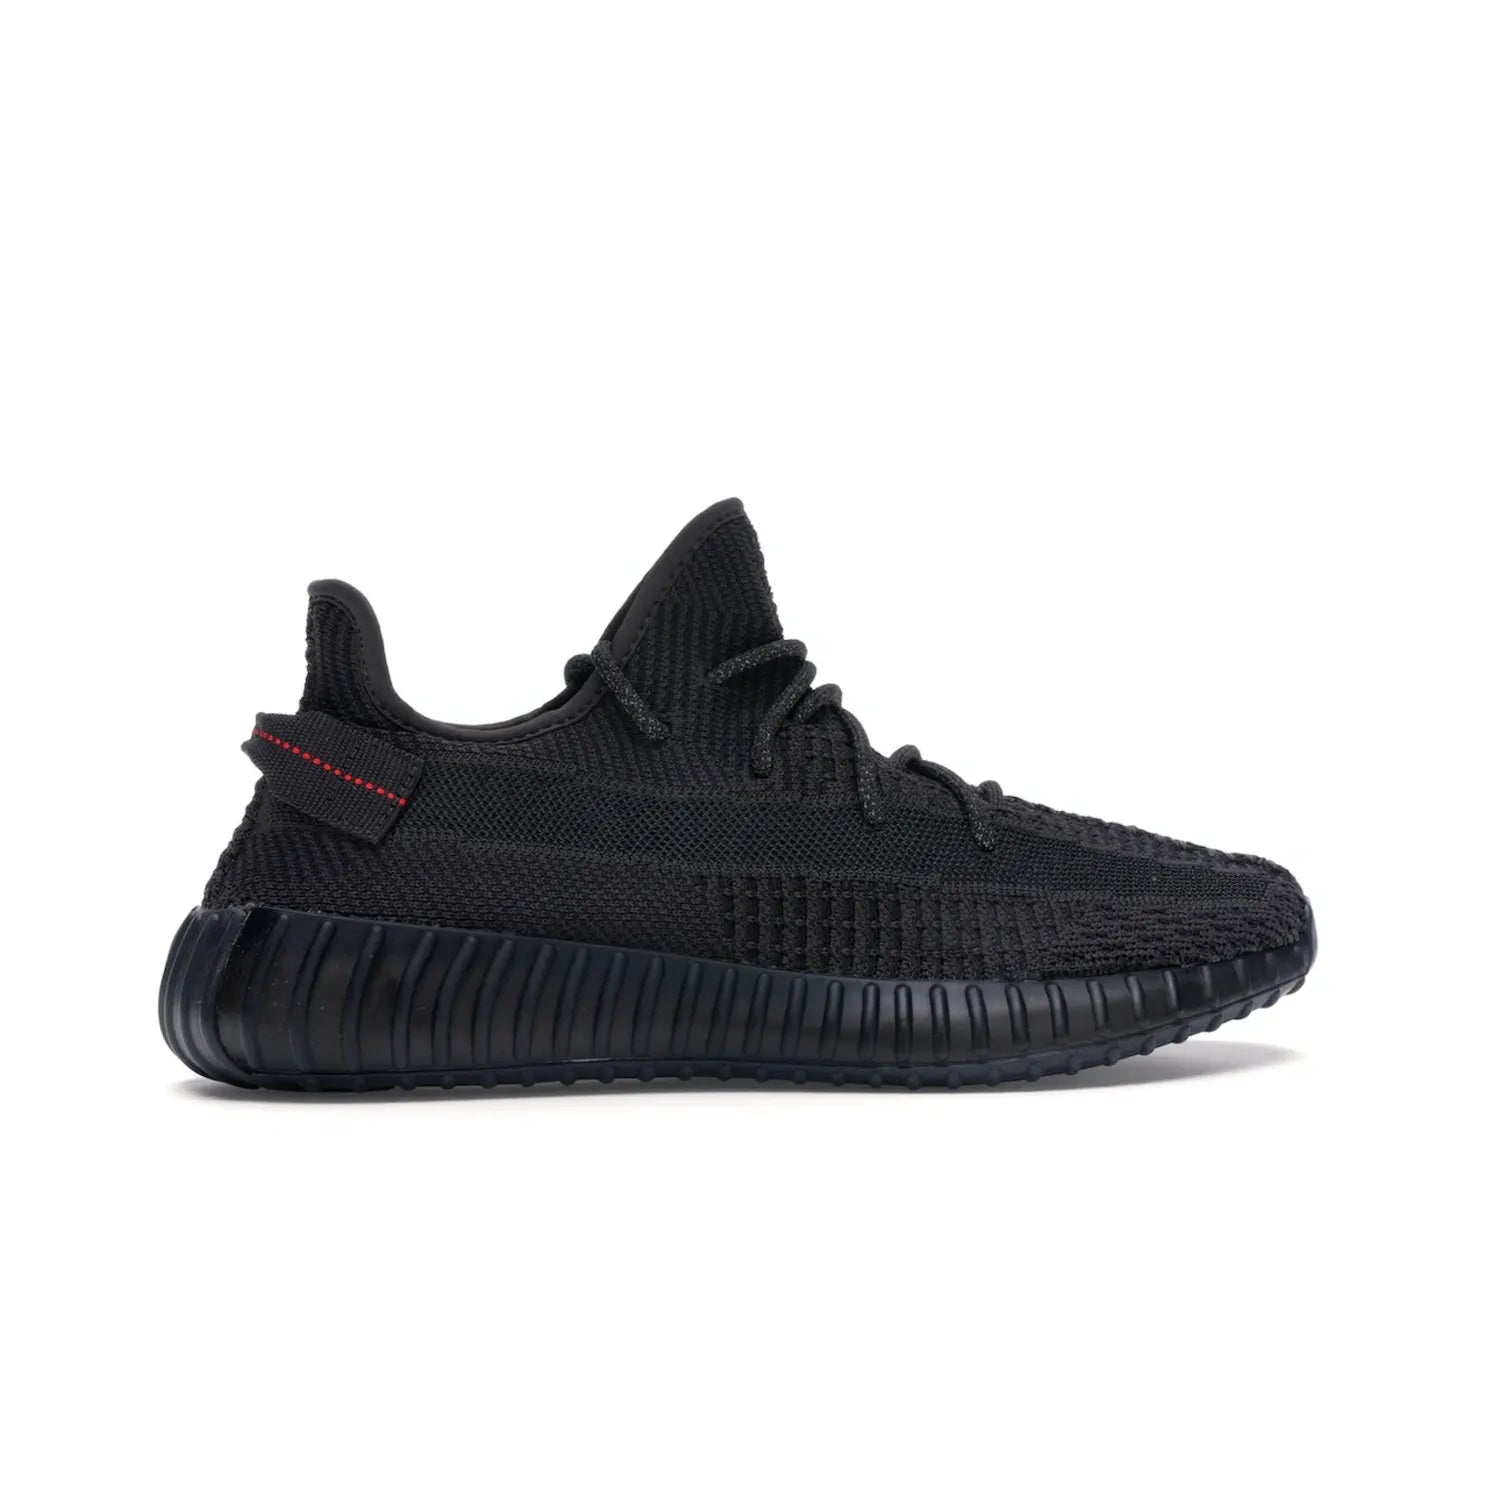 adidas Yeezy Boost 350 V2 Black (Non-Reflective) - Image 36 - Only at www.BallersClubKickz.com - A timeless, sleek silhouette crafted from quality materials. The adidas Yeezy Boost 350 V2 Black (Non-Reflective) brings style and sophistication. Get yours now!